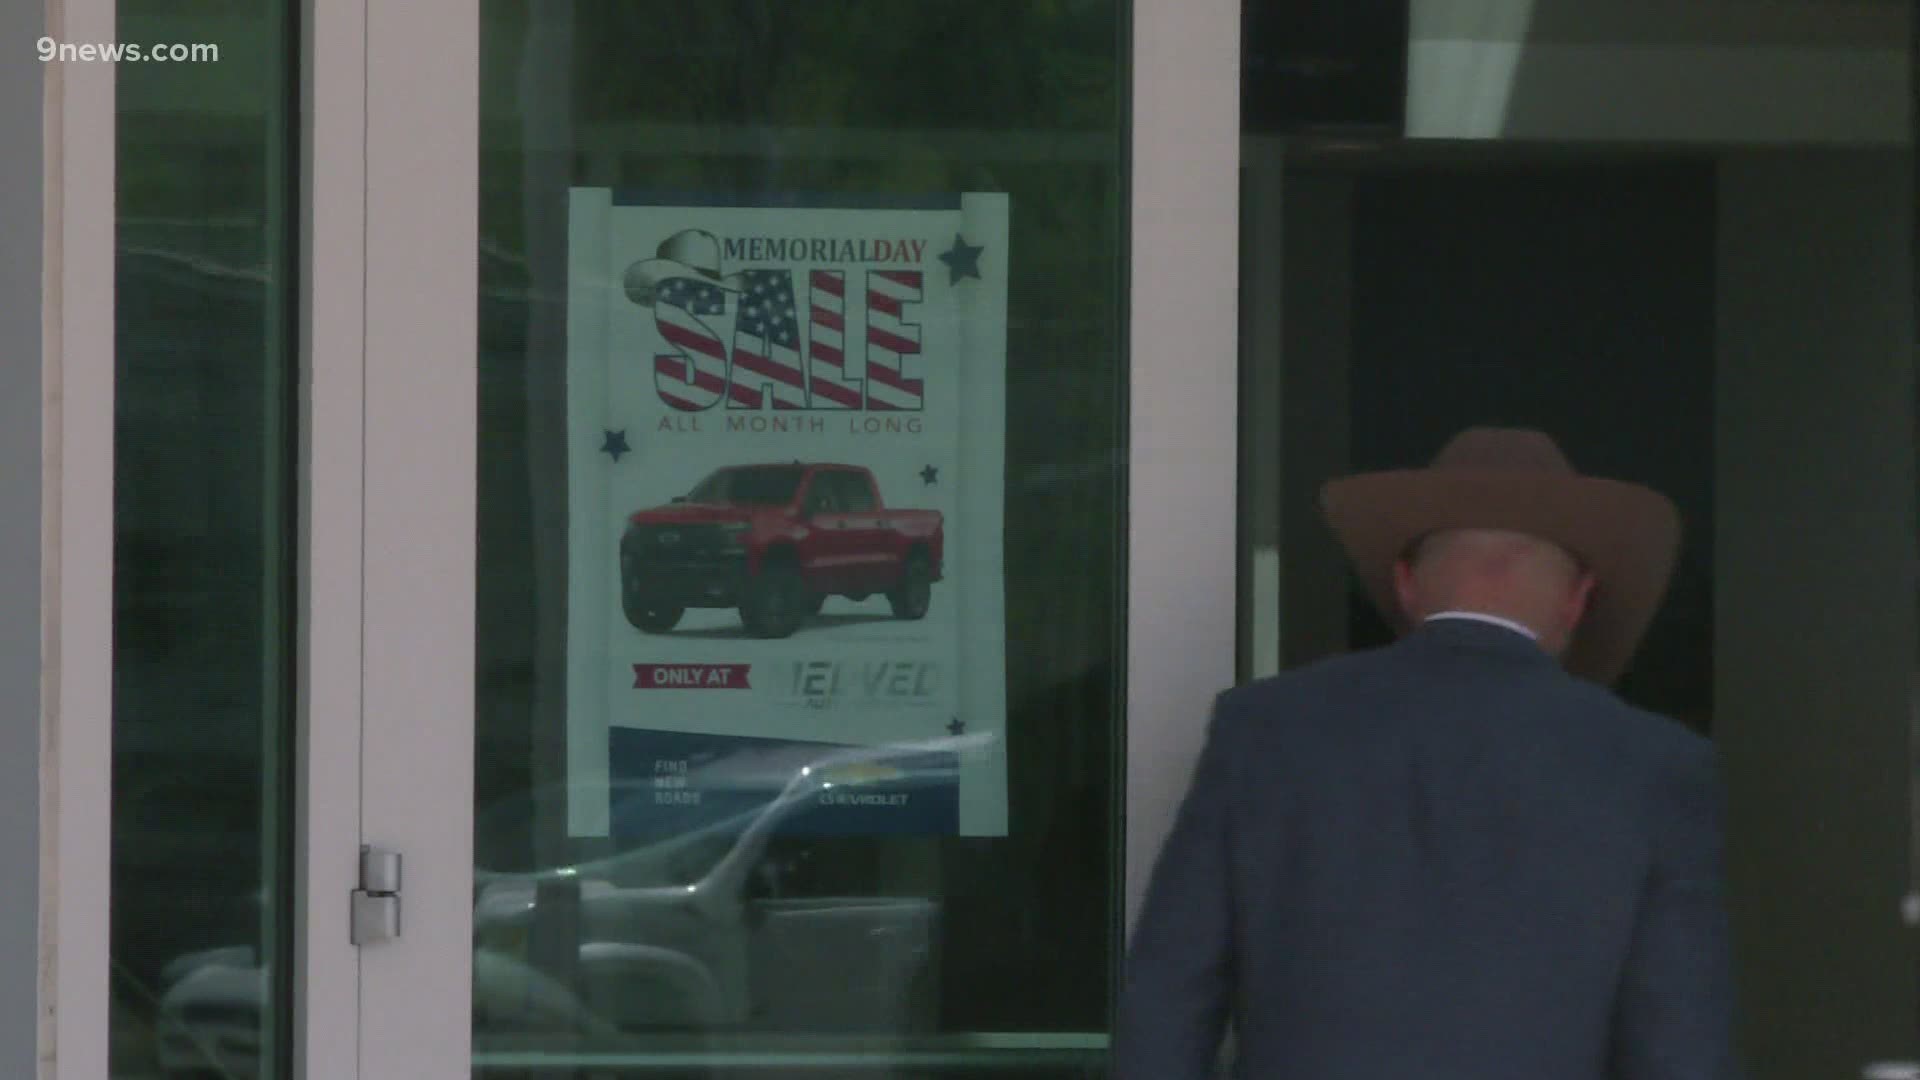 Ahead of the busy memorial weekend, many car dealerships are experiencing a shortage due to a supply chain issue.